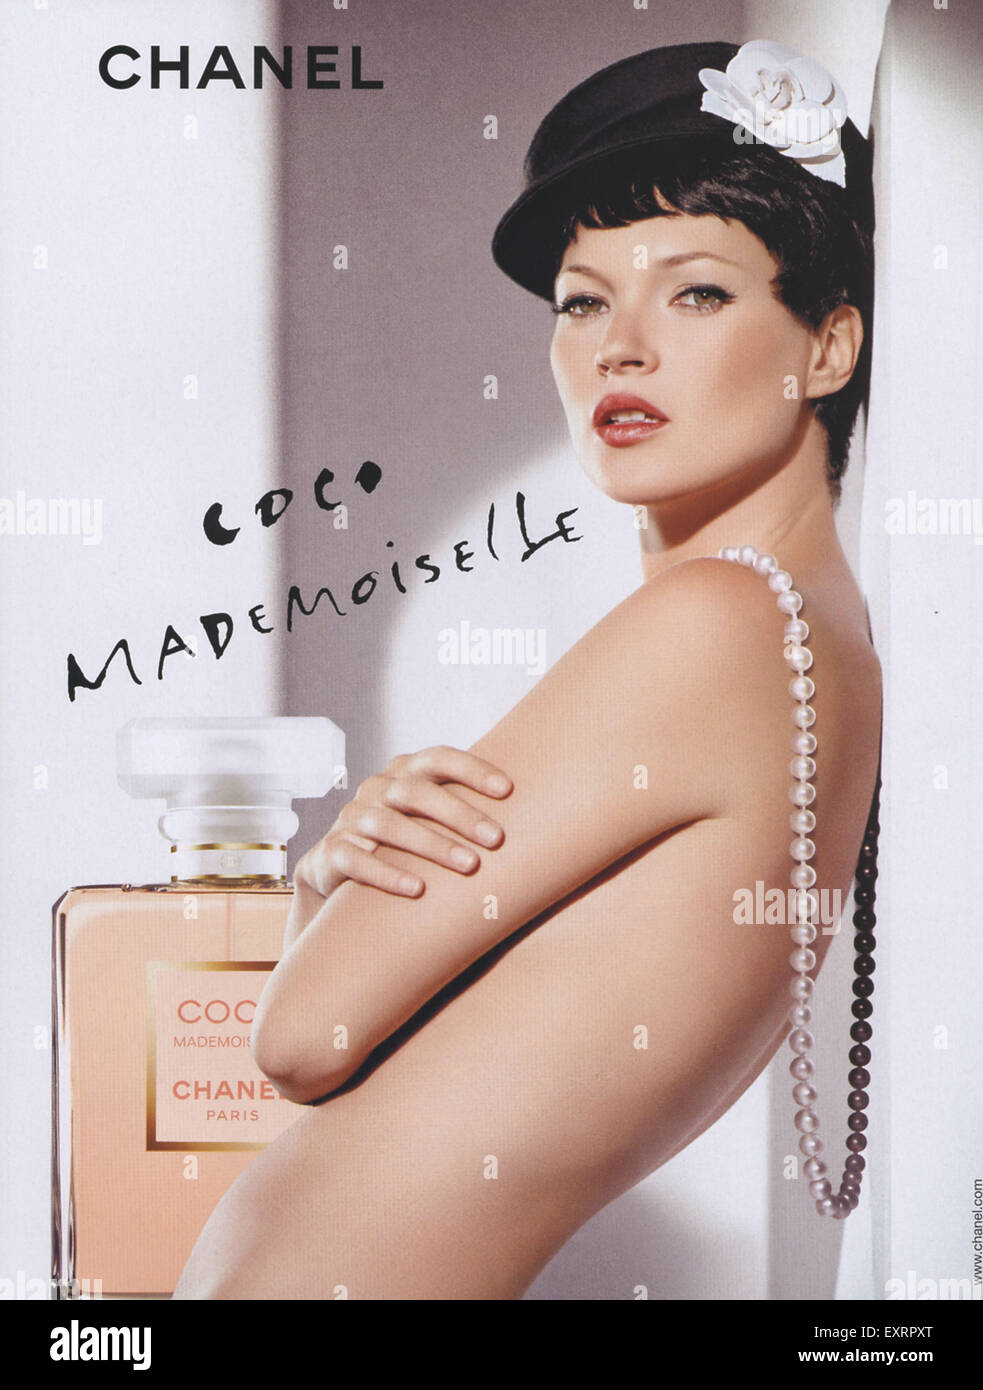 Coco Mademoiselle by Chanel avec Kate Moss 2  Coco mademoiselle, Coco  chanel mademoiselle, Chanel perfume